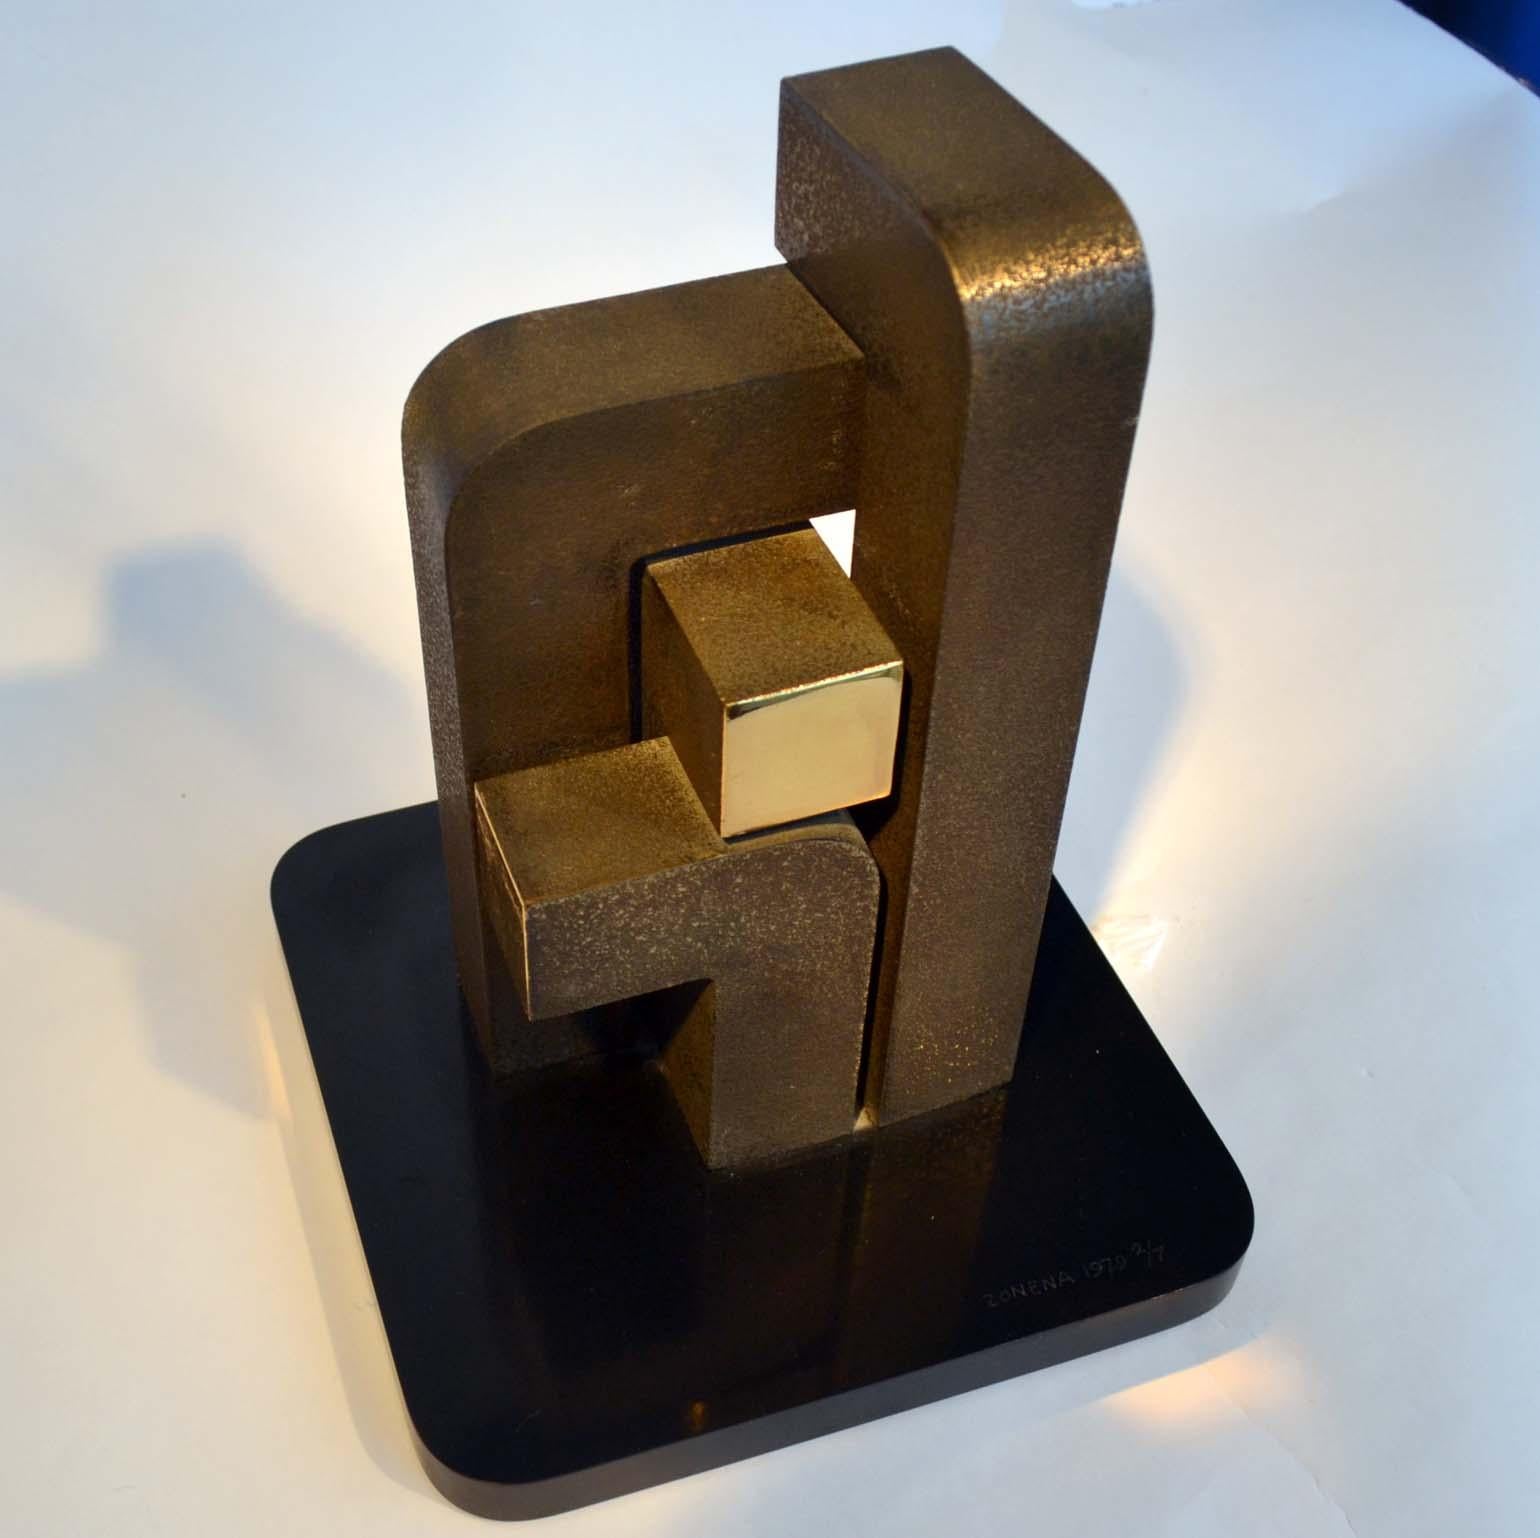 Cast Abstract Geometric Minimalist Bronze Sculpture by Zonena 1979 in Limited Edition